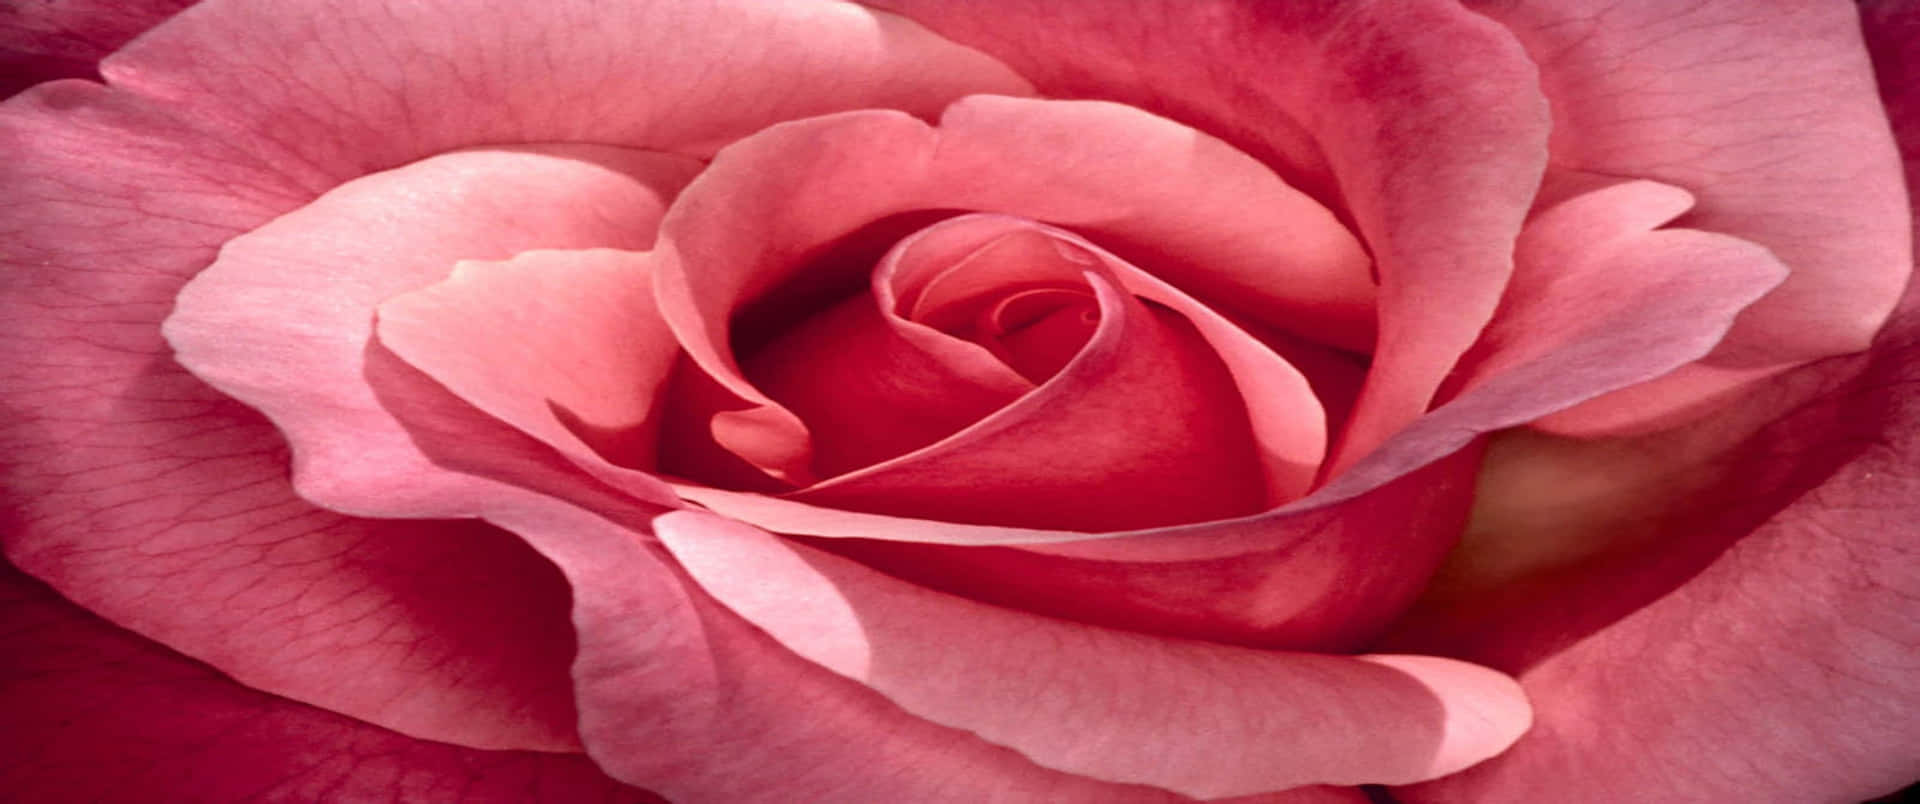 Beautiful roses in high resolution 3440x1440p